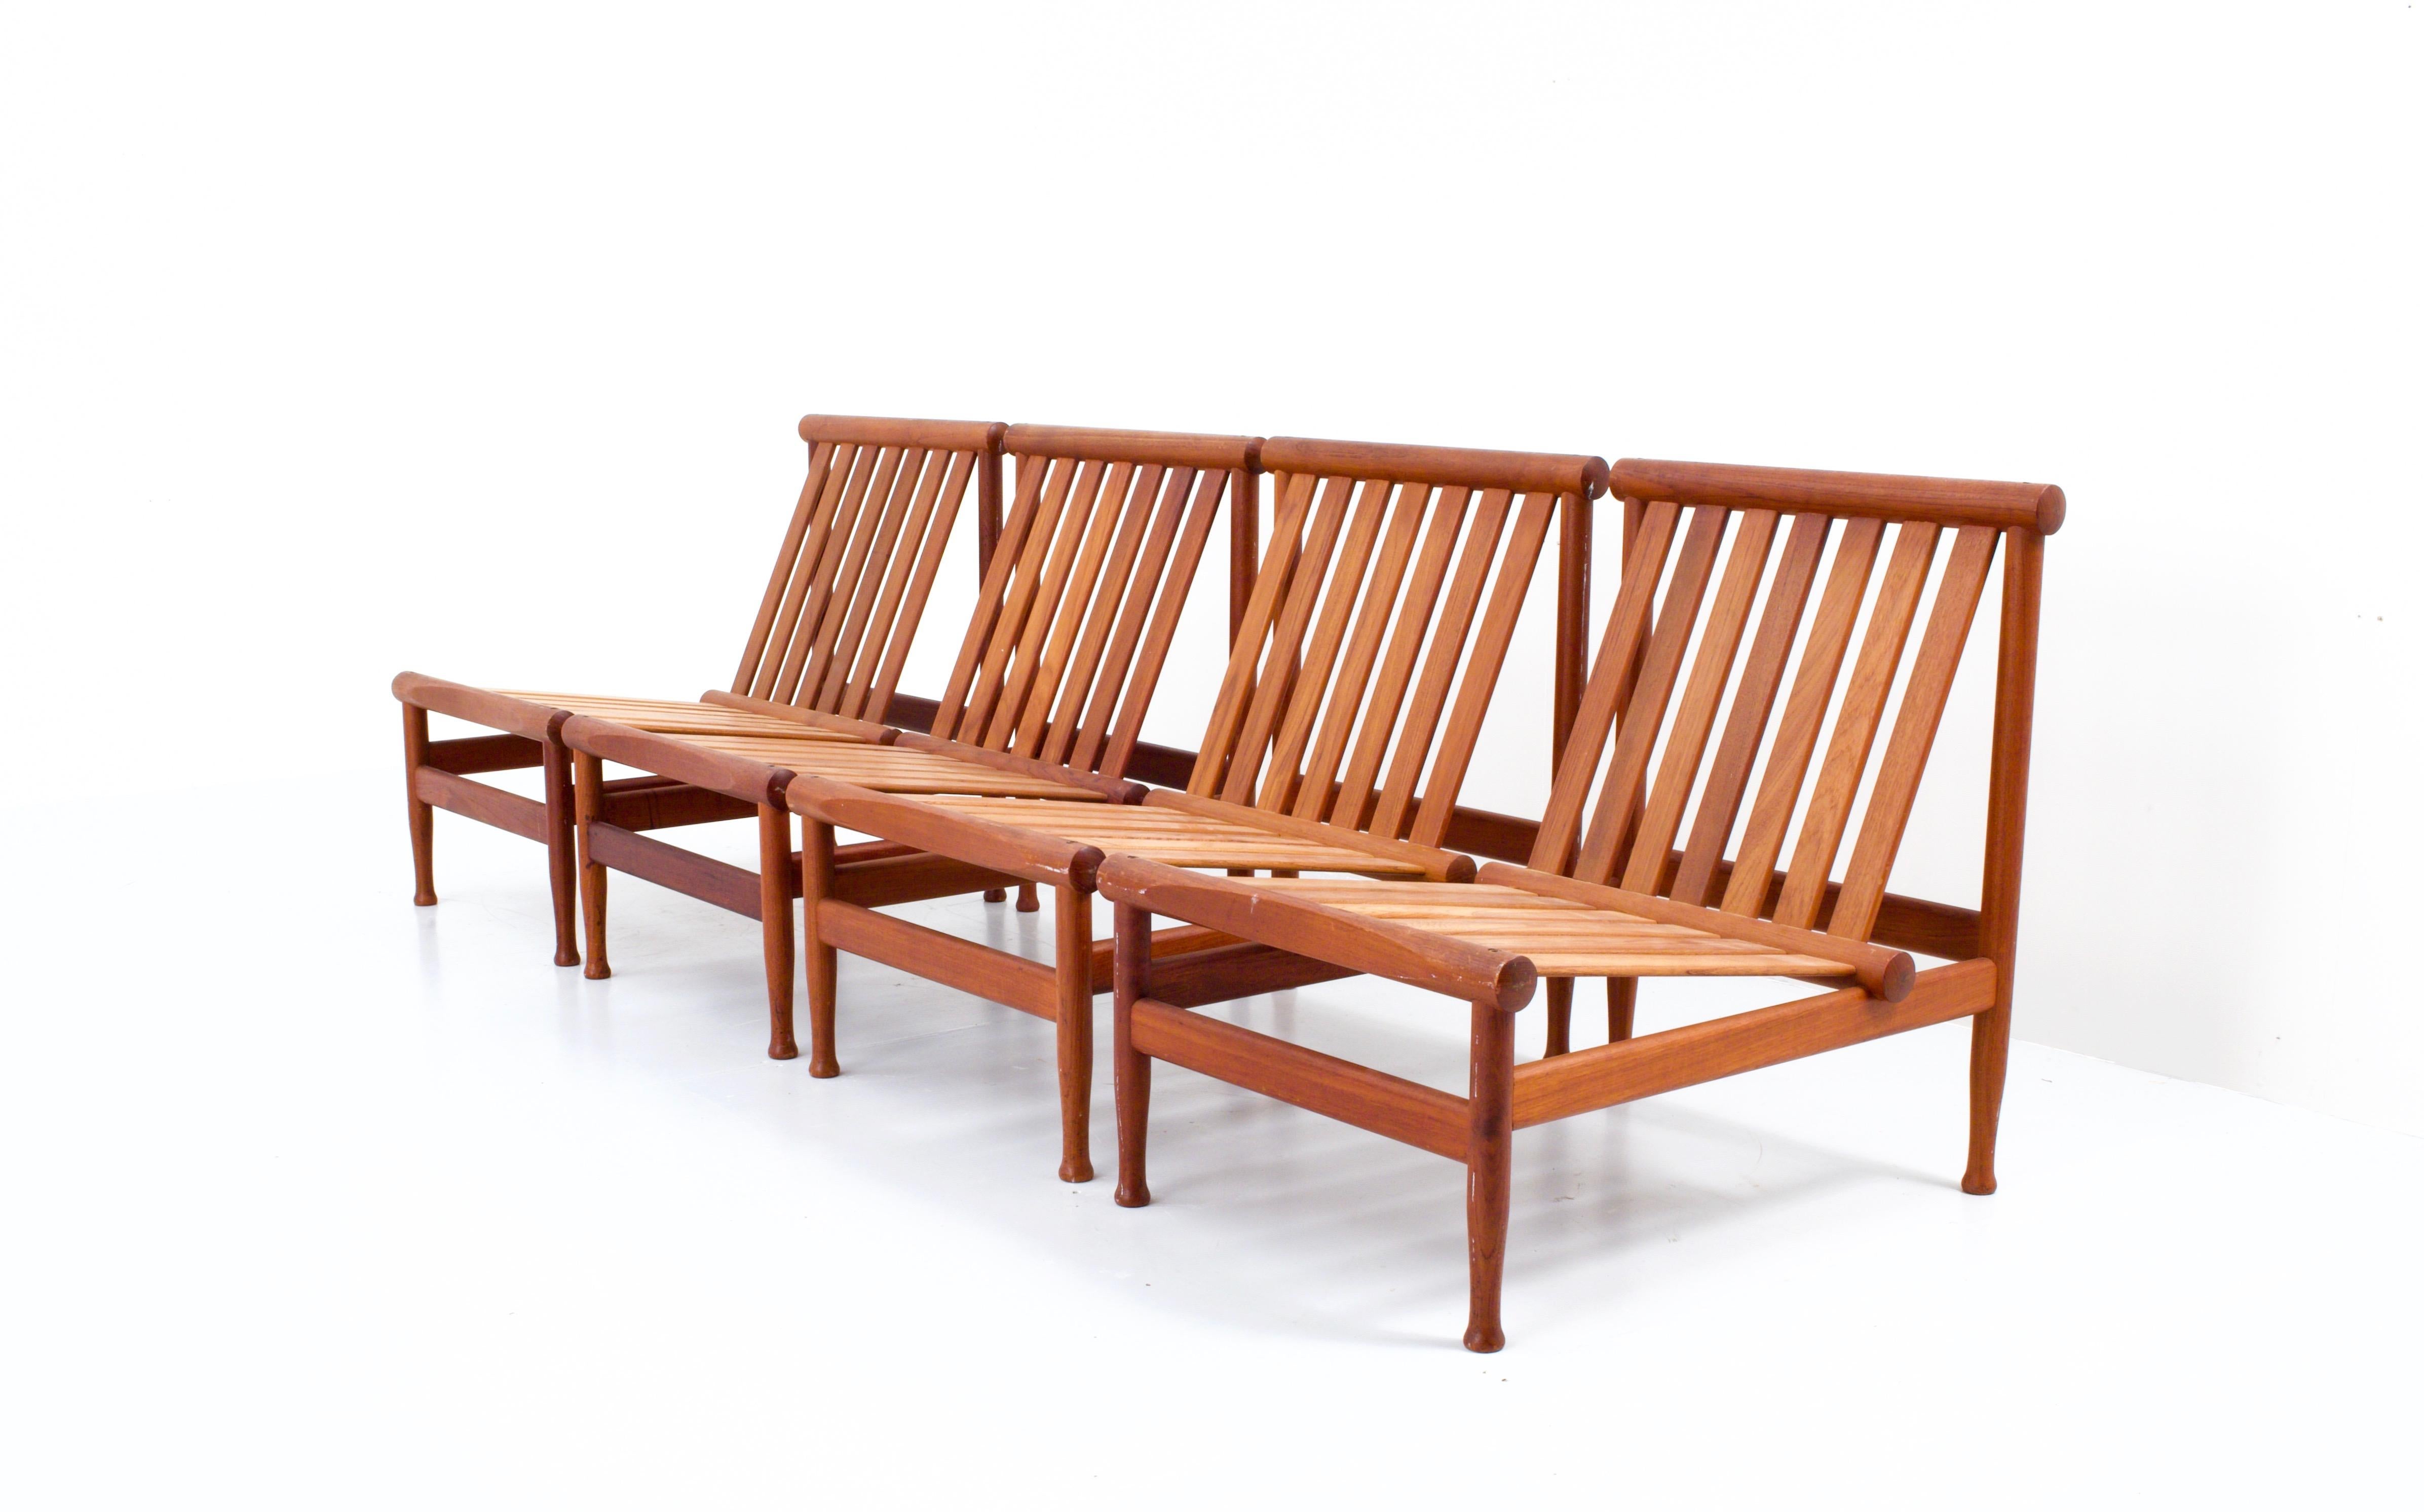 Famous model 501 teak lounge chair, also known as the 'Japan' chair, for Søborg Møbler by Kai Lyngfeld Larsen.
Very comfortable and sturdy set of lounge chairs, that can also be used as modules to create two smaller benches or one larger for